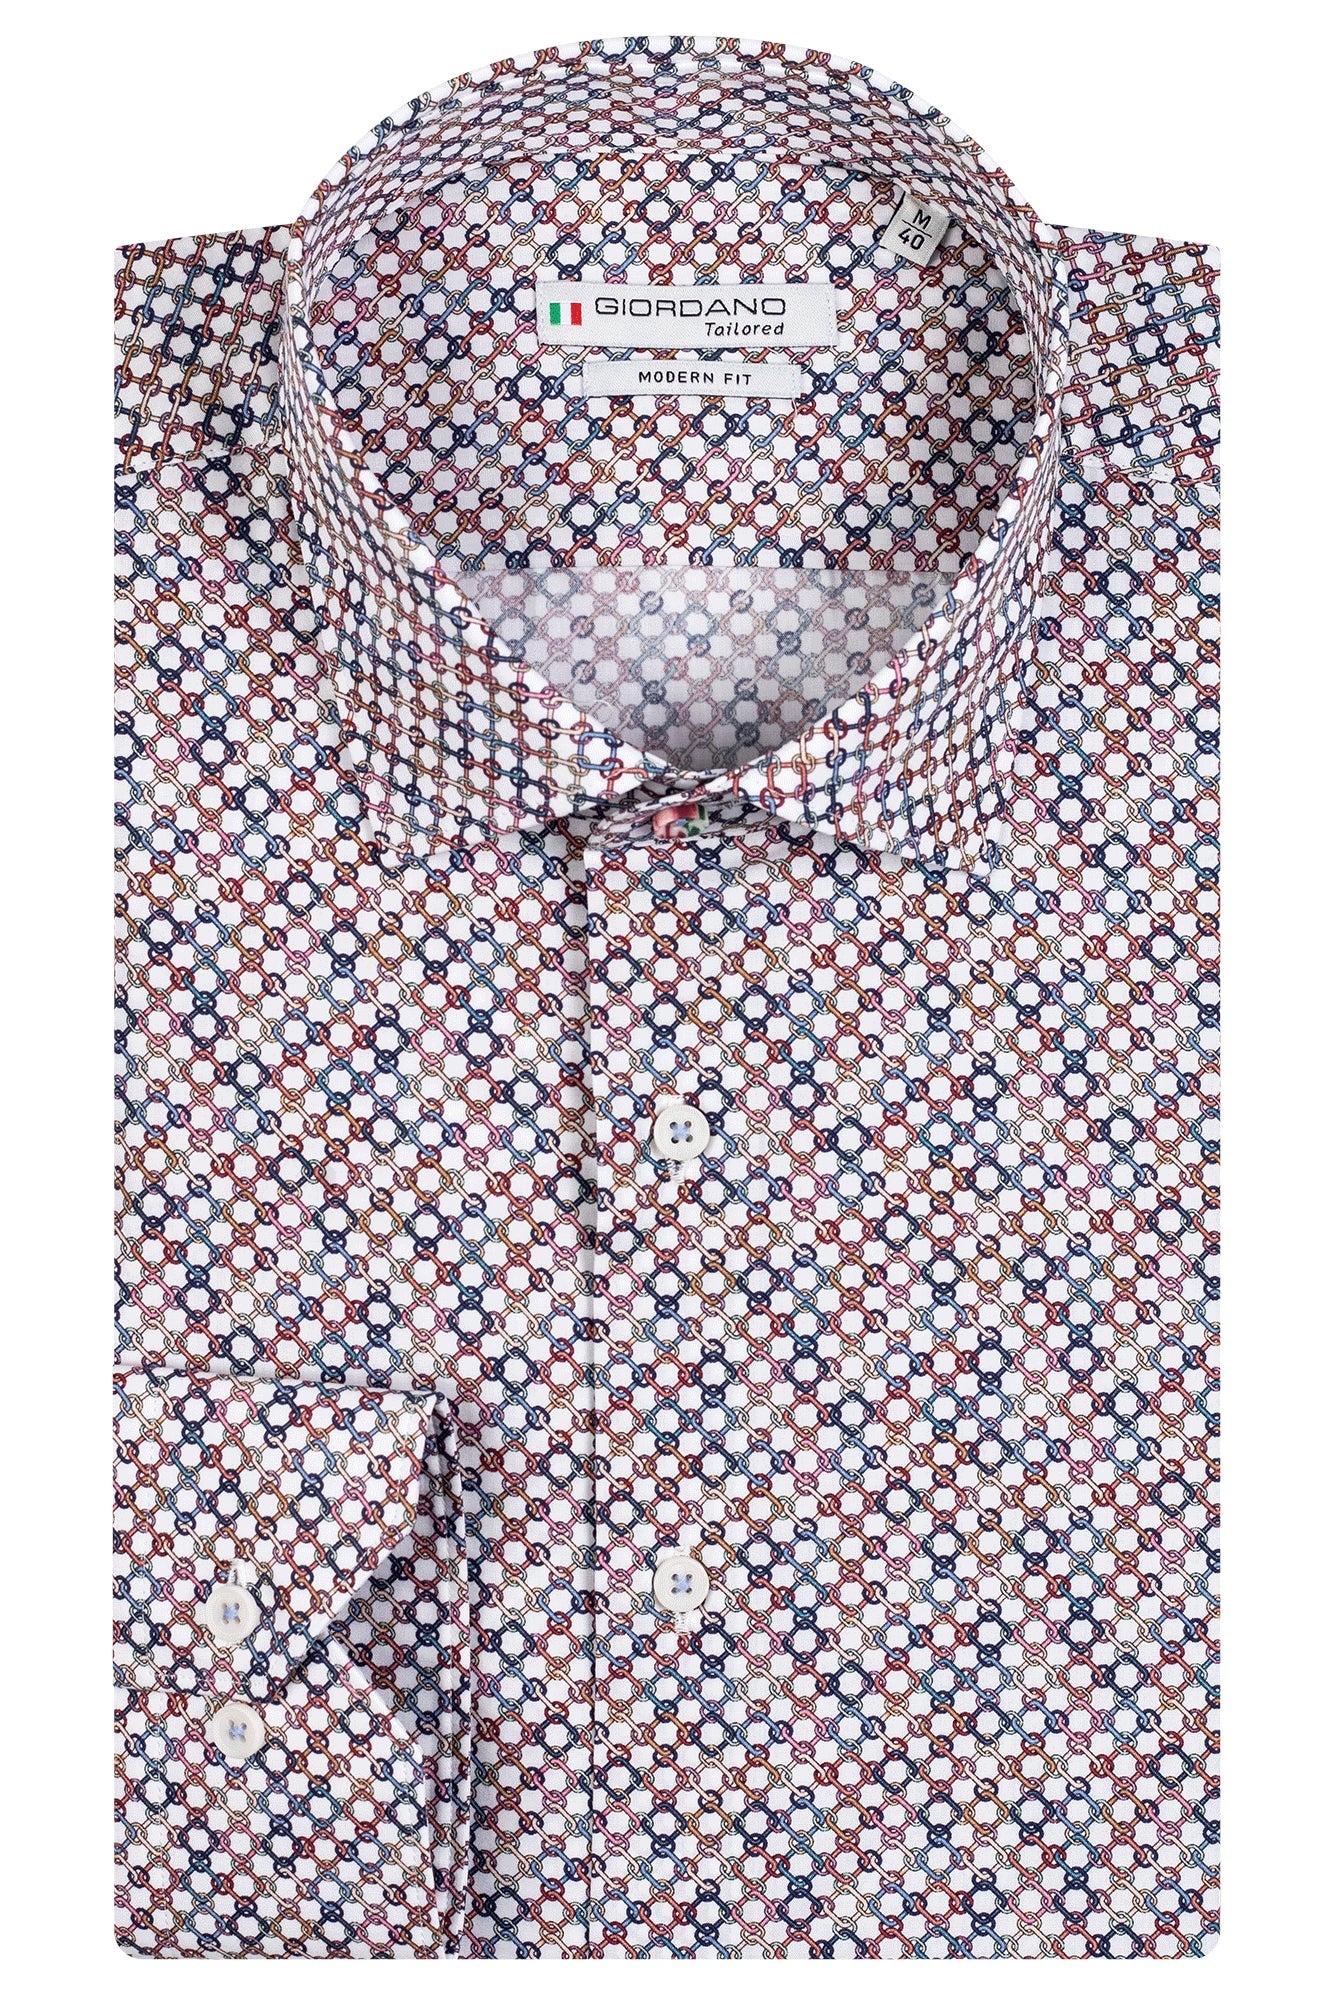 Giordano 100% cotton shirt. Circular patterned shirt in a mix of colours. The perfect summer light shirt. Dressed casually not tucked in, or more formal tucked in. Great paired with jeans and chinos but also shorts. 